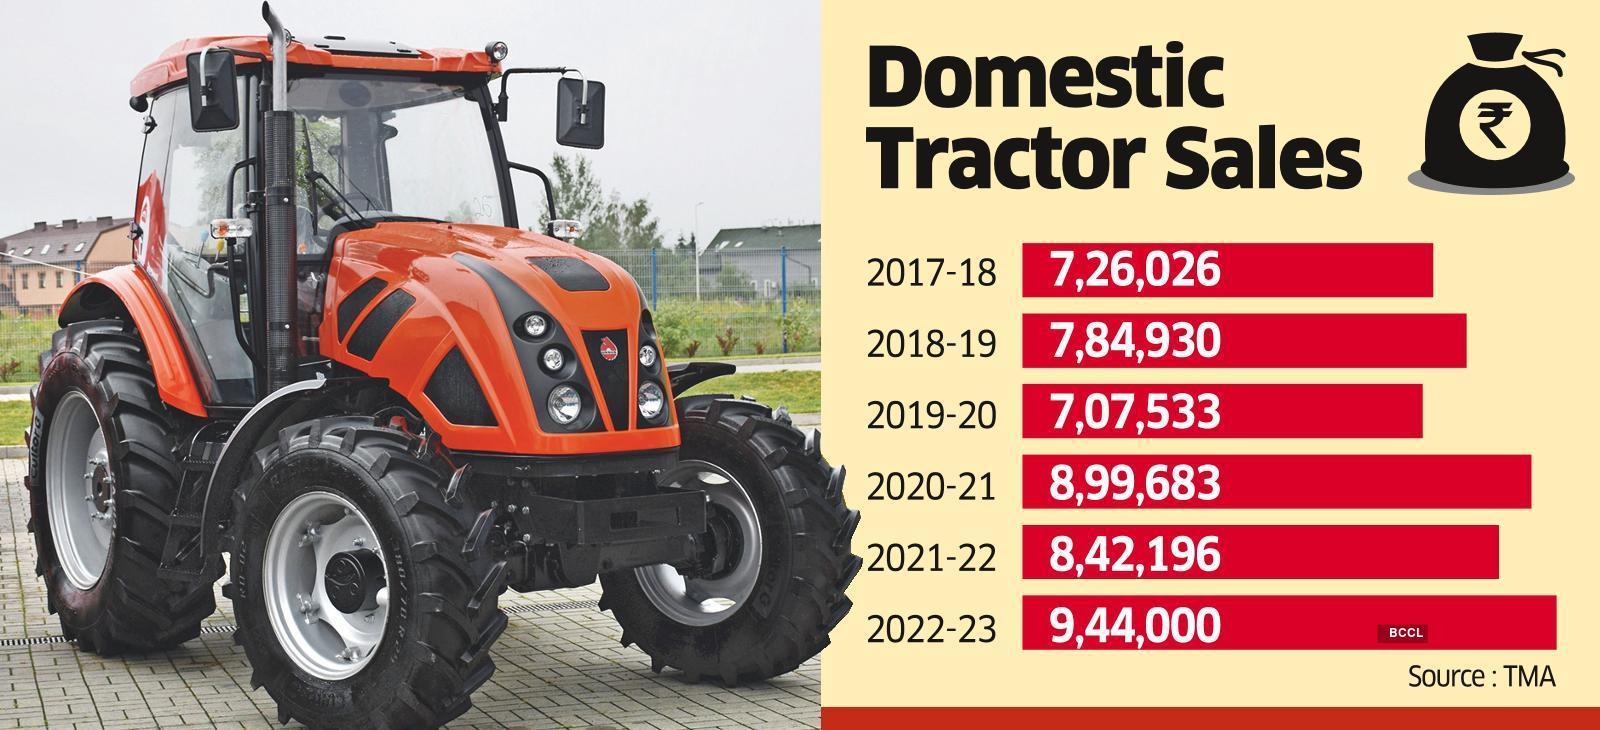 Domestic tractor sales hit record high of 9.44 lakh in FY23 - The ...